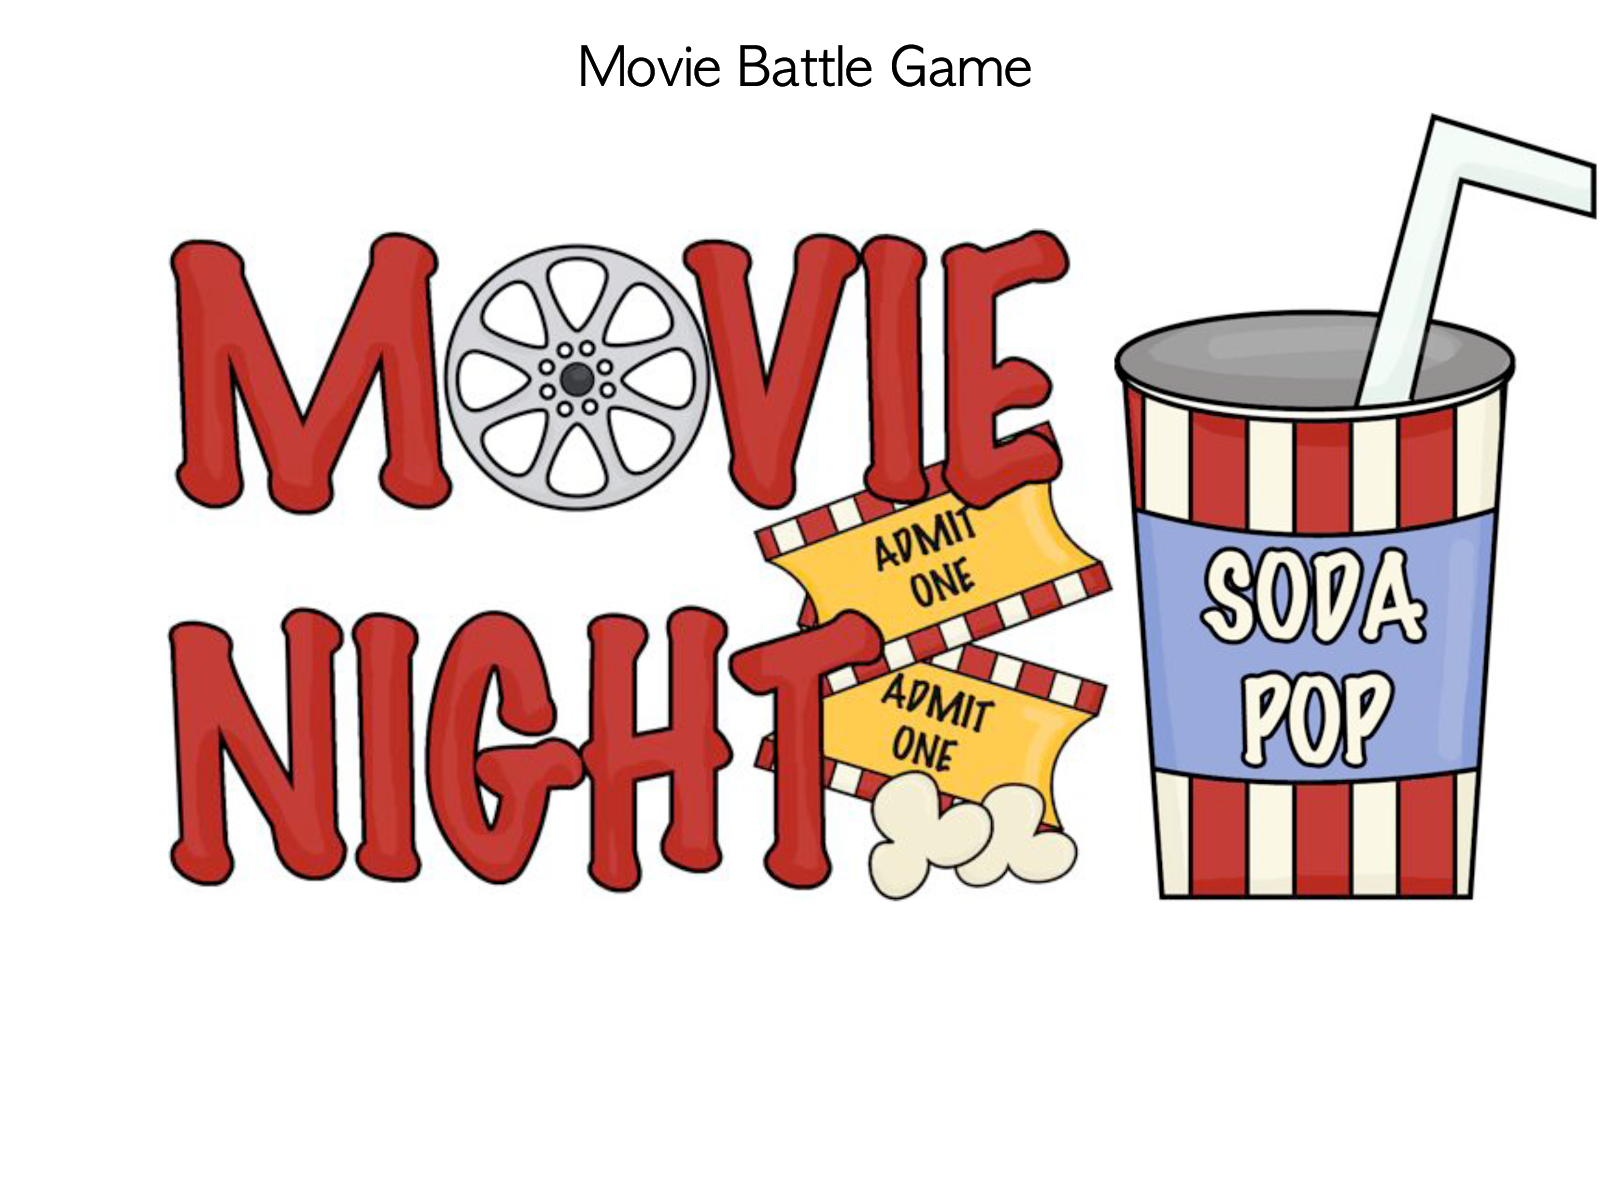 Movie clipart free clip art images image 1 2